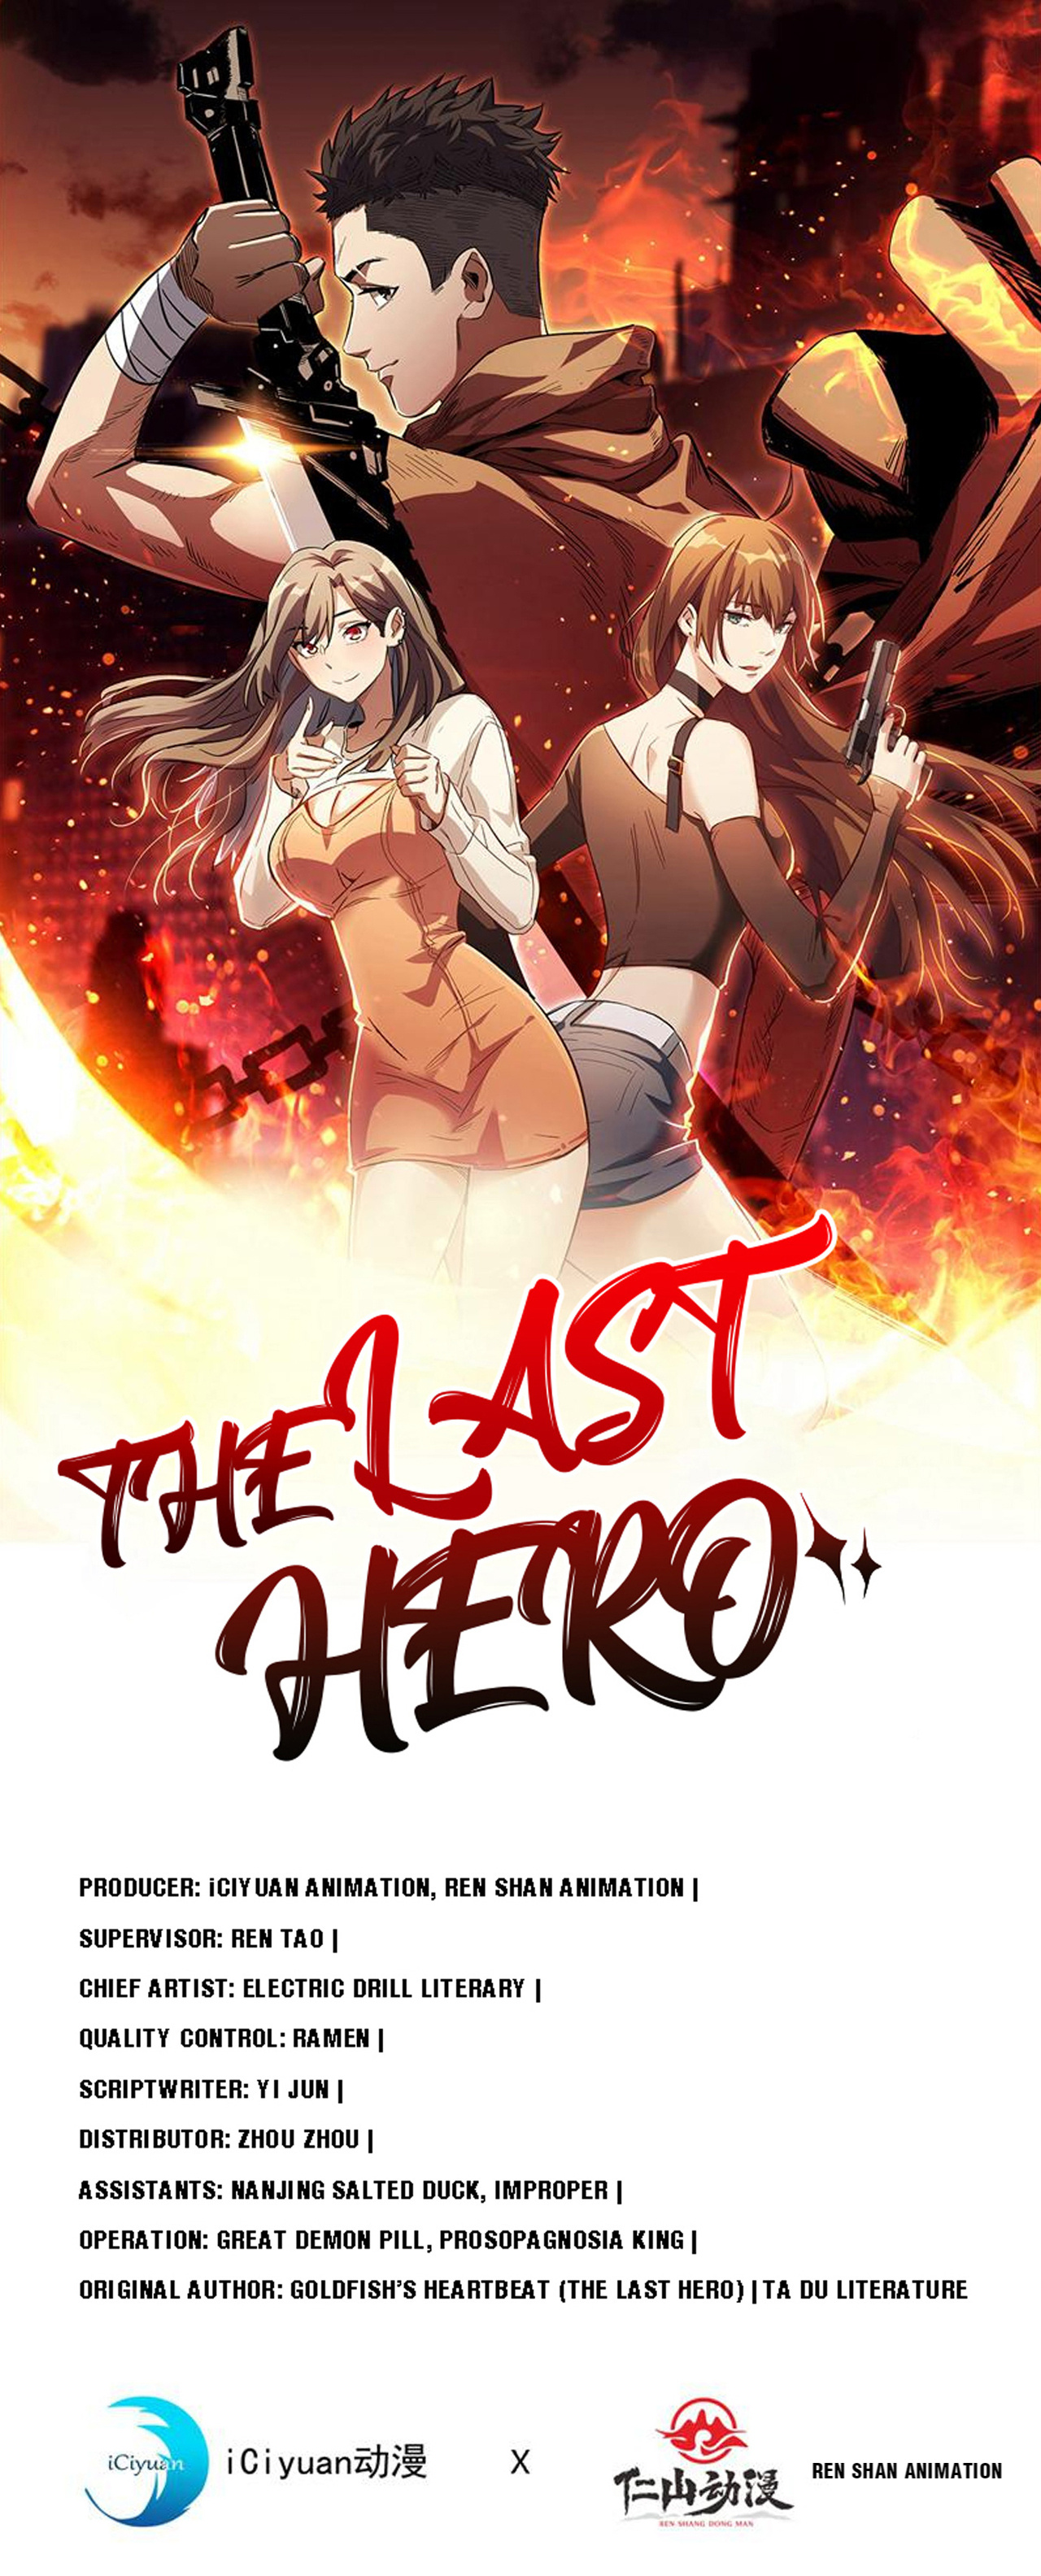 The Last Hero, I Am Picking up Attributes and Items in Last Days 146